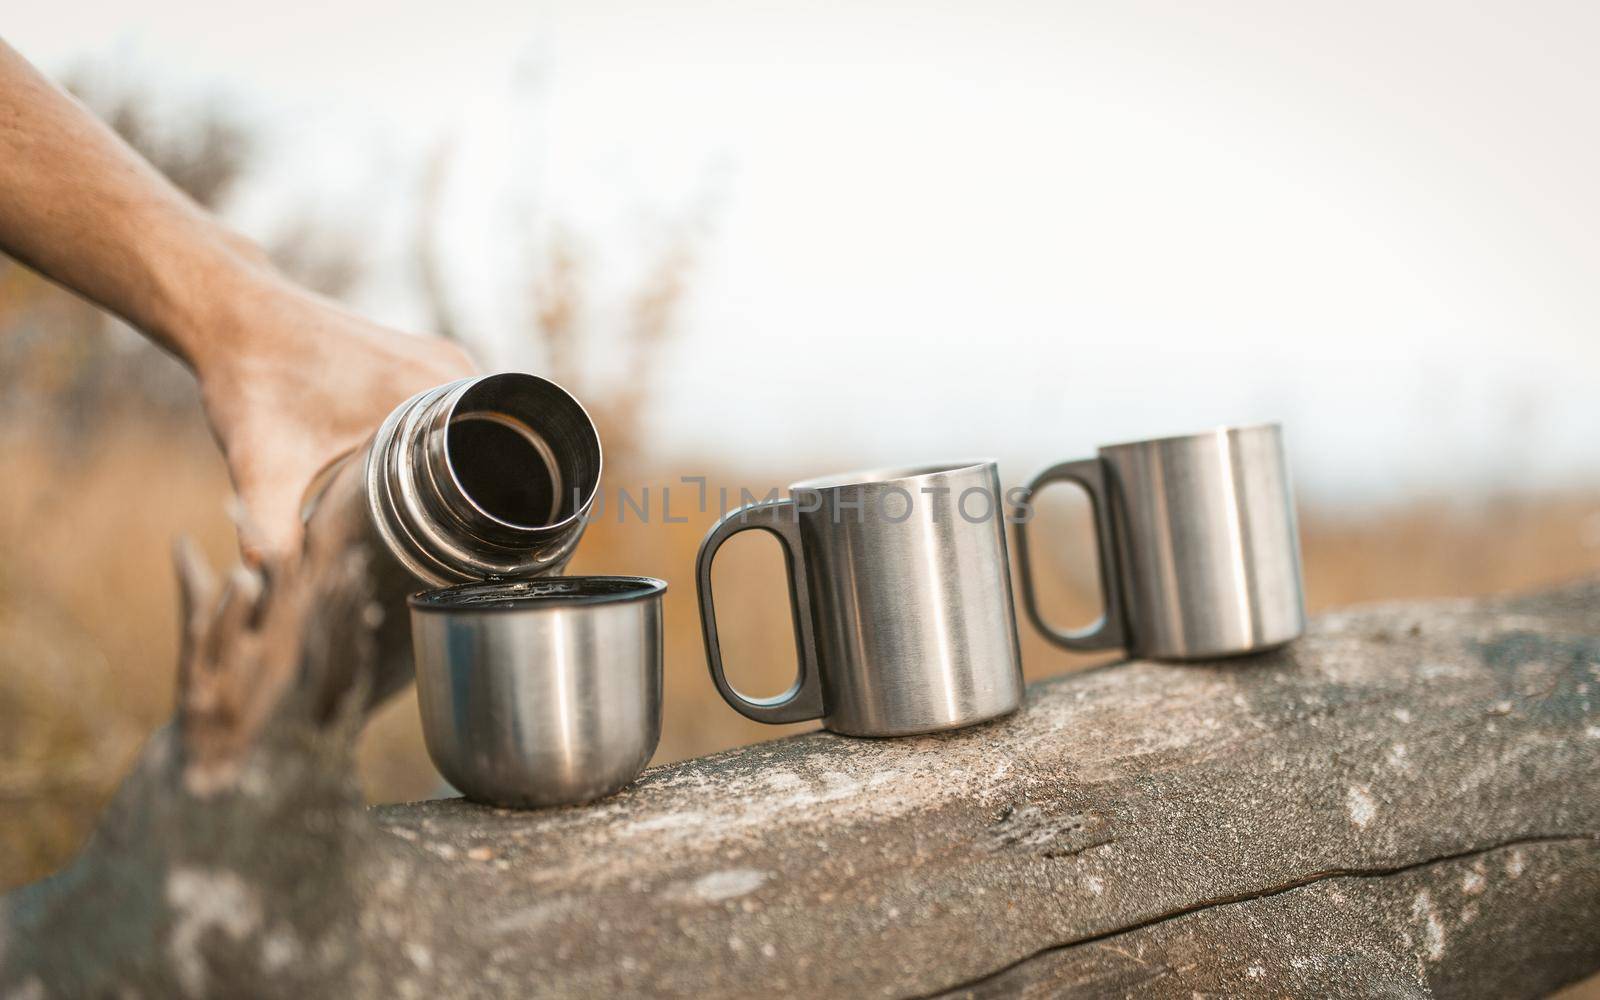 Caucasian Man Pouring Hot Drink In Mugs From Thermos Outdoors, Three Steel Cups Are On Old Tree Lying In A Log, Close Up Shot, Tea Party Or Coffee Drink In Nature Concept